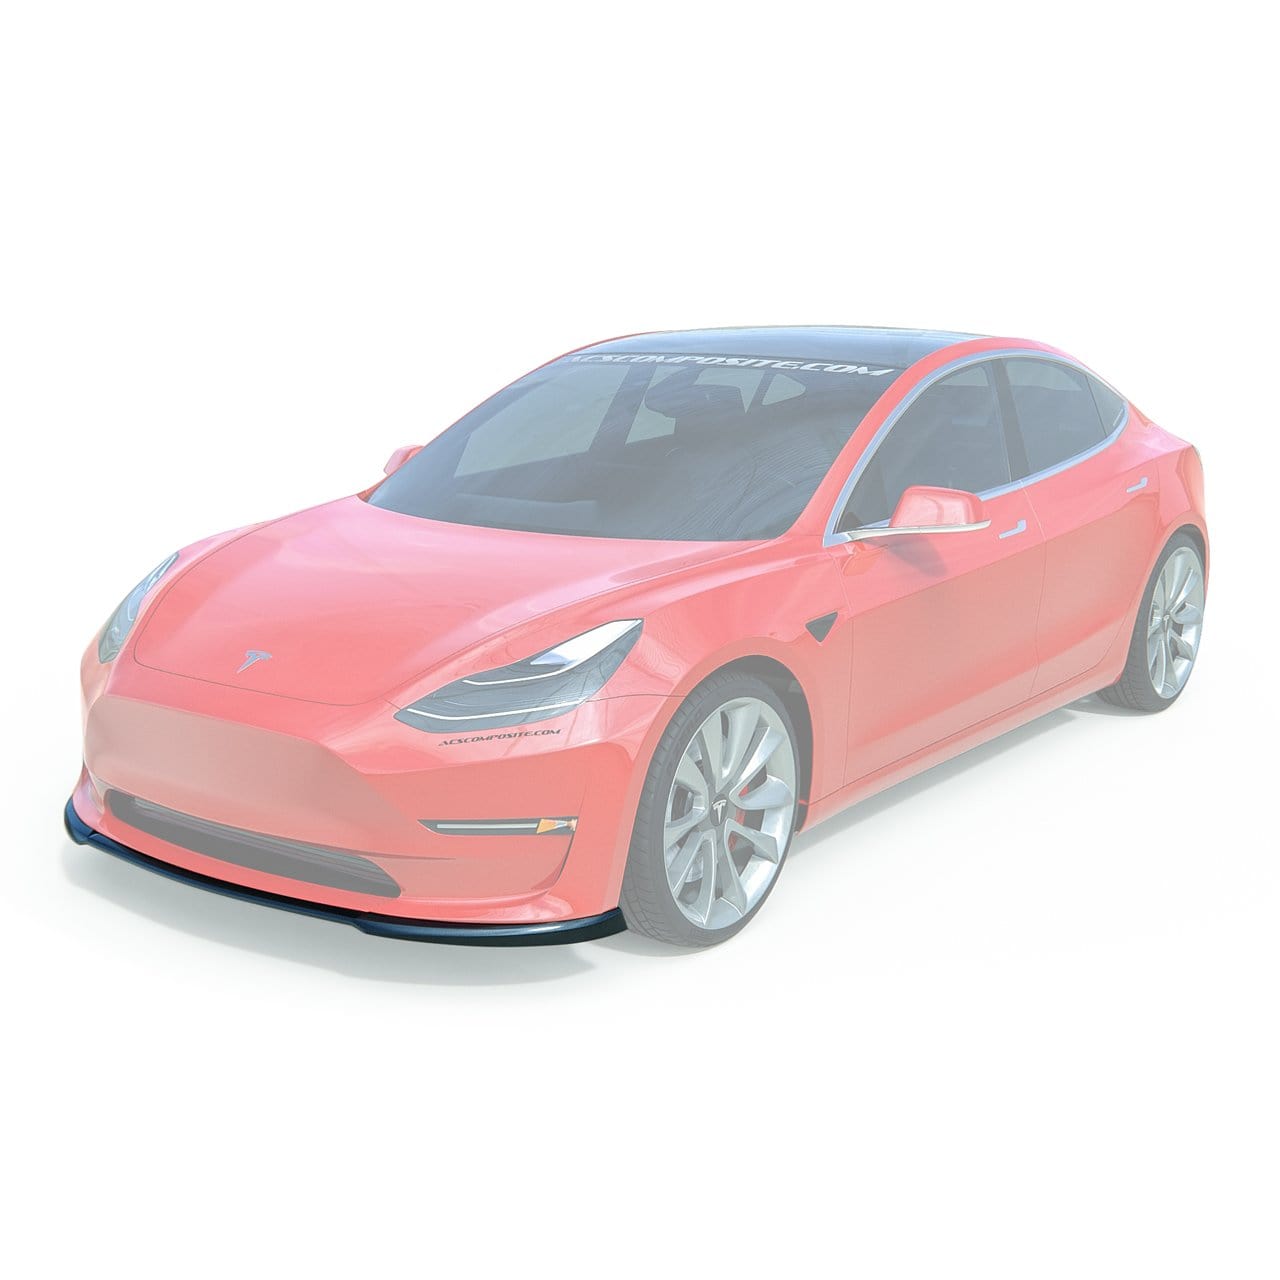 2024 Tesla Model 3 Up Close: Refined and Renewed